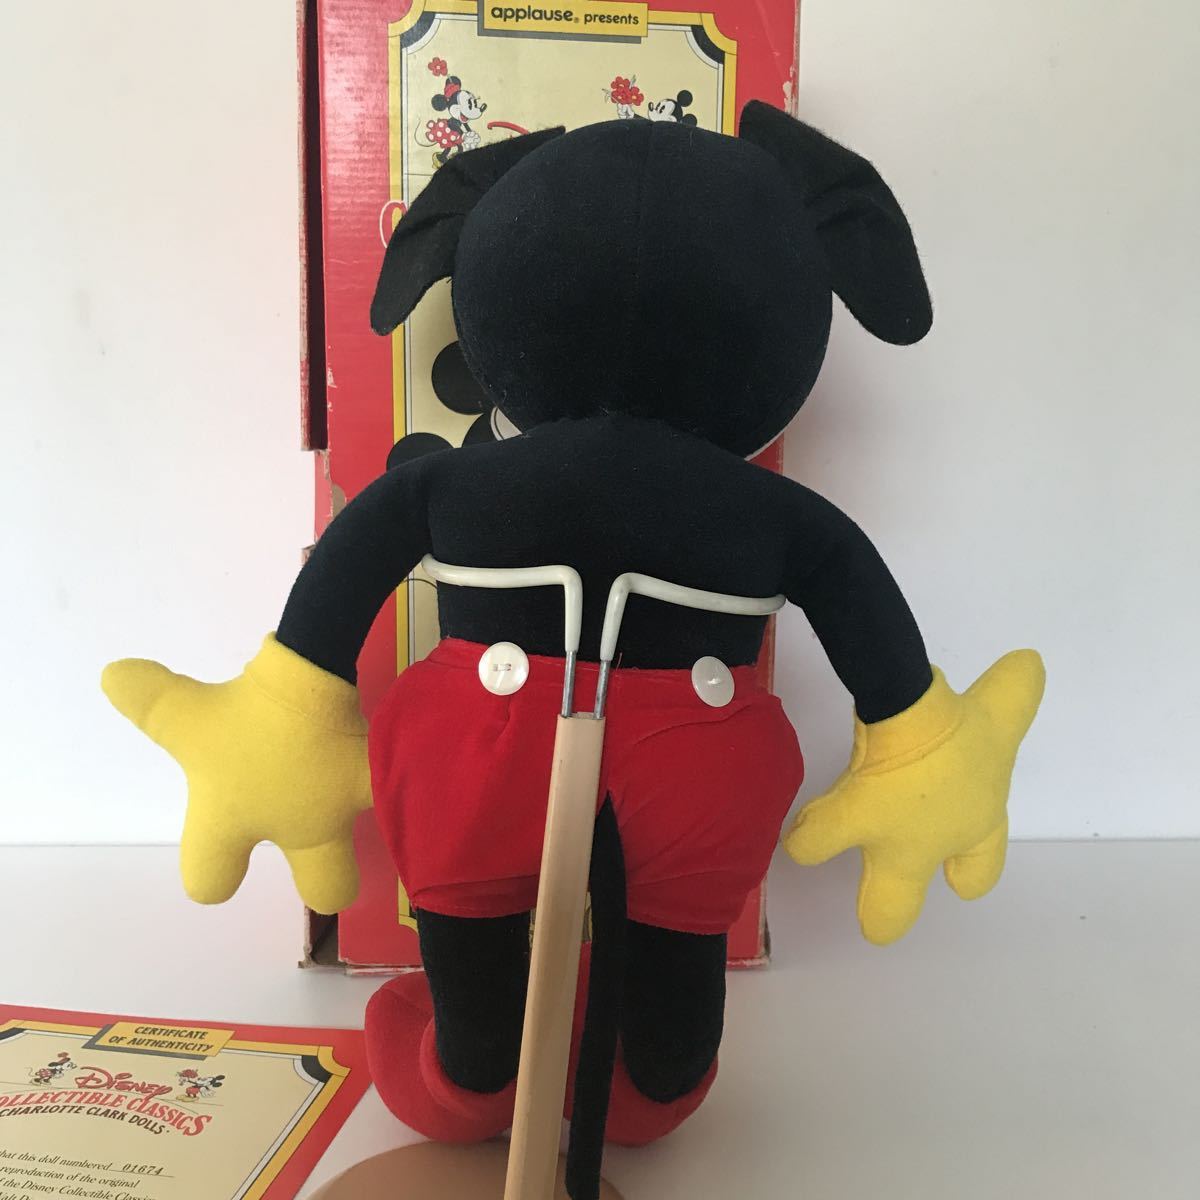  ultra rare America Los Angeles limitation one ten thousand body 1990 serial number 1674 soft toy Mickey Mouse Disney 90 period retro Mickey USA